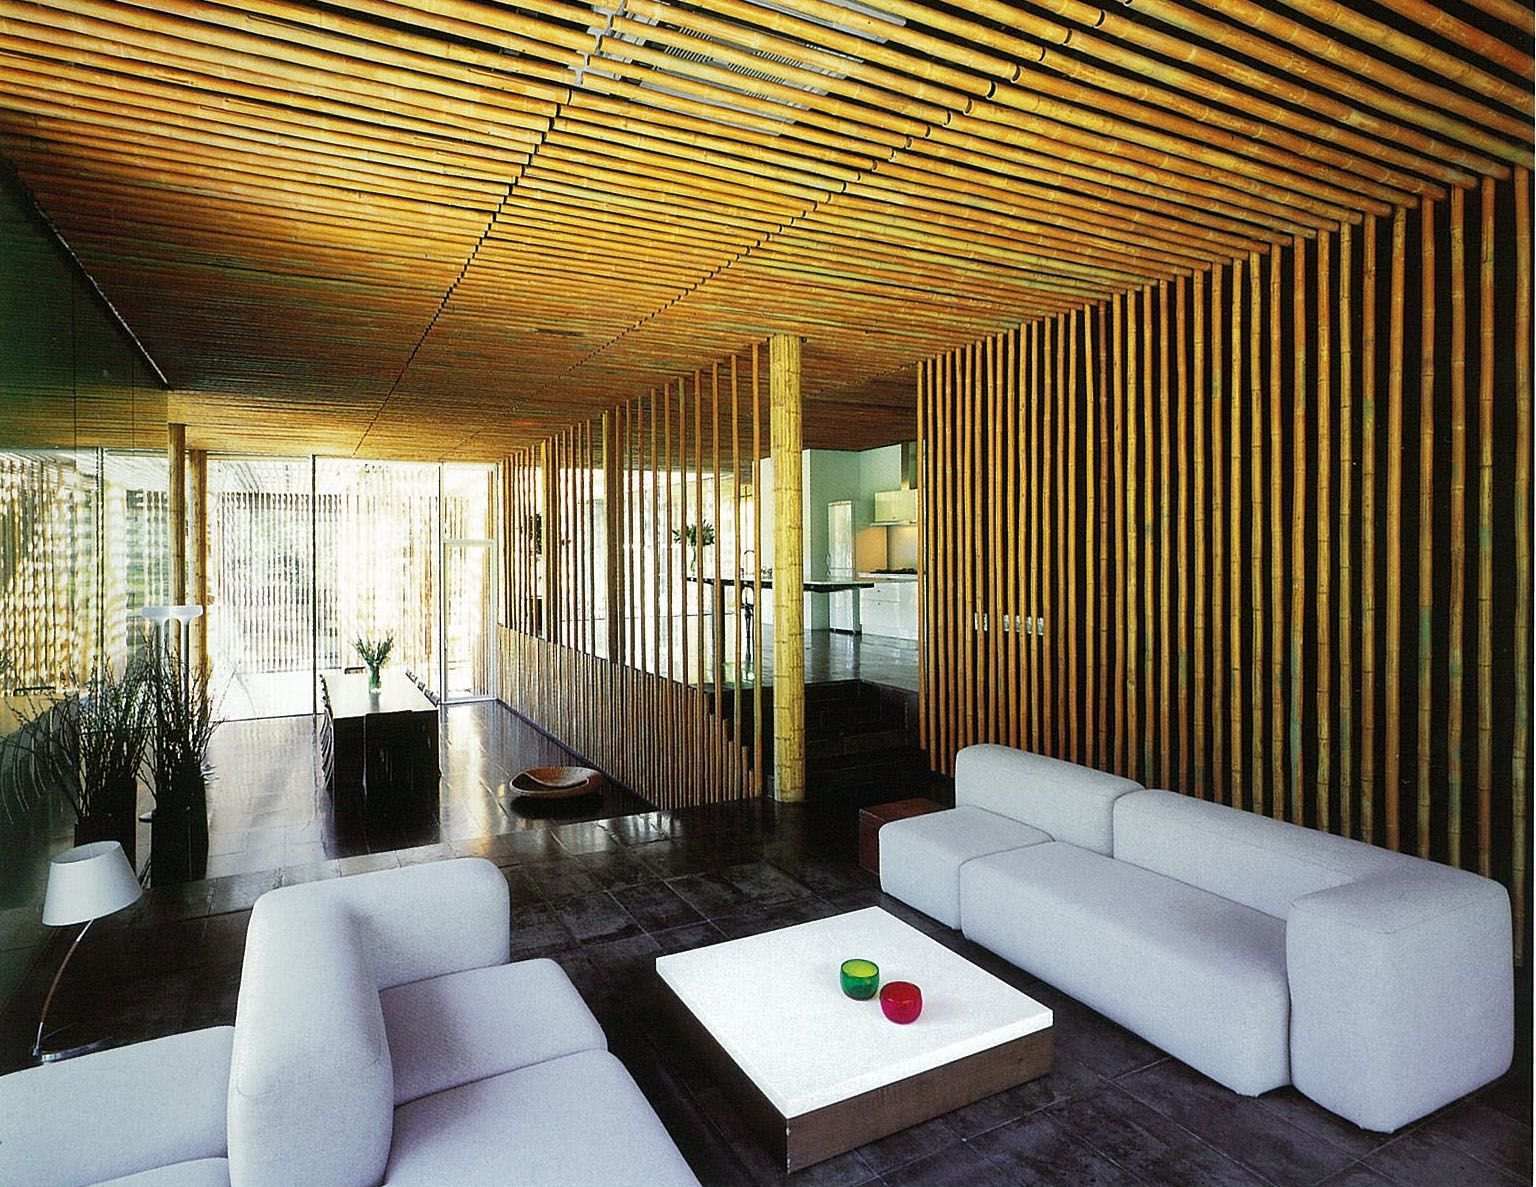 Bamboo Furniture: A Natural And Sustainable Option For Your Home